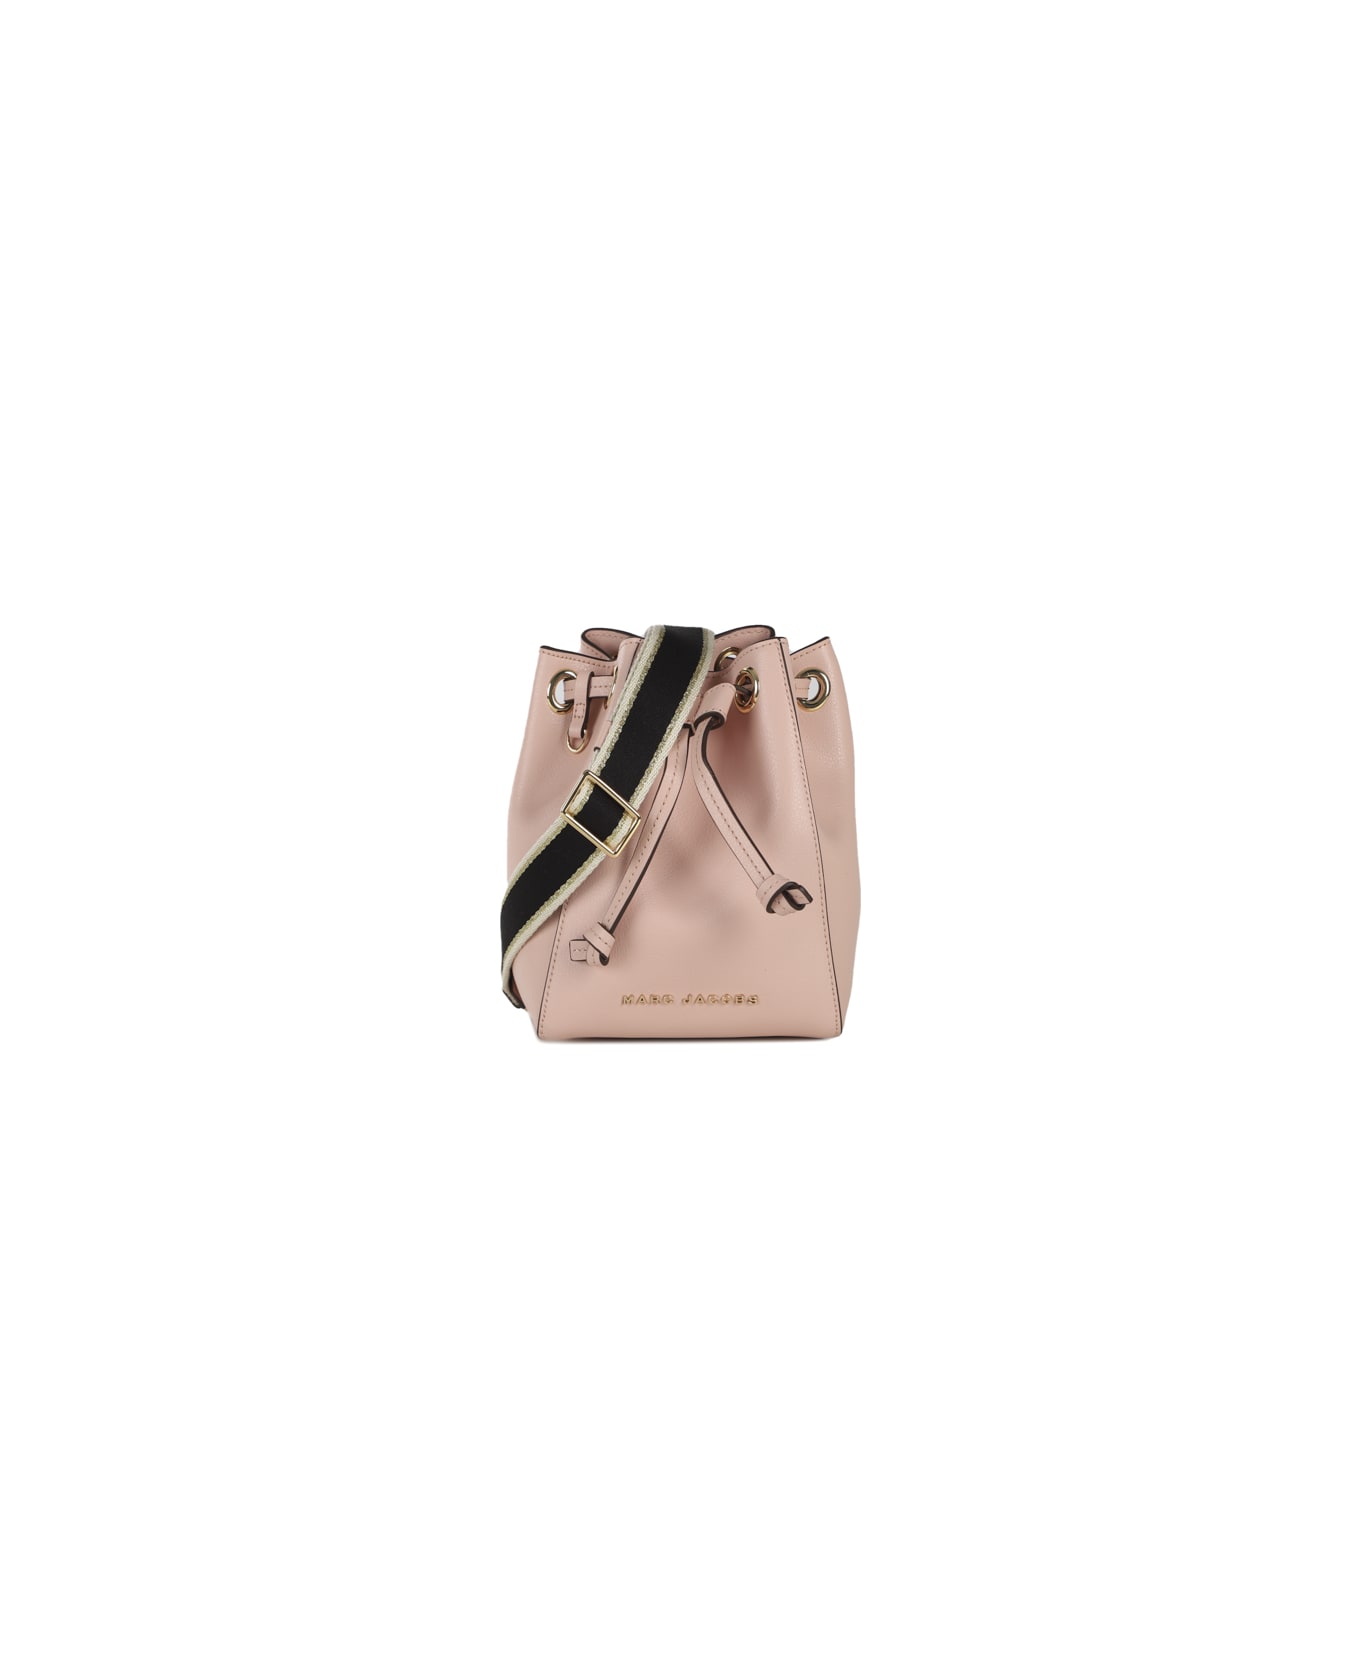 Marc Jacobs The Bucket Bag - Rose pink トートバッグ